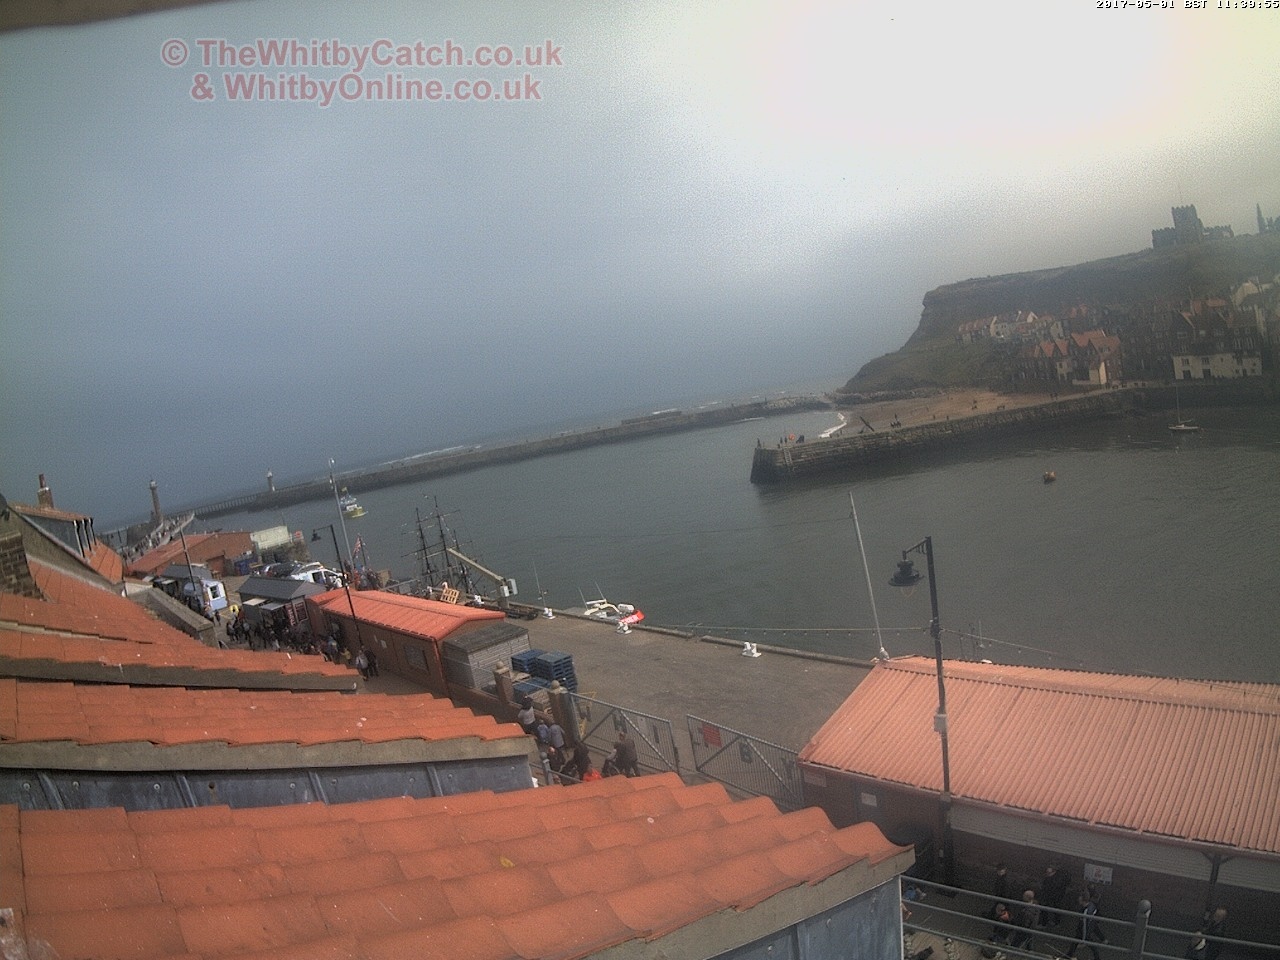 Whitby Mon 1st May 2017 11:40.